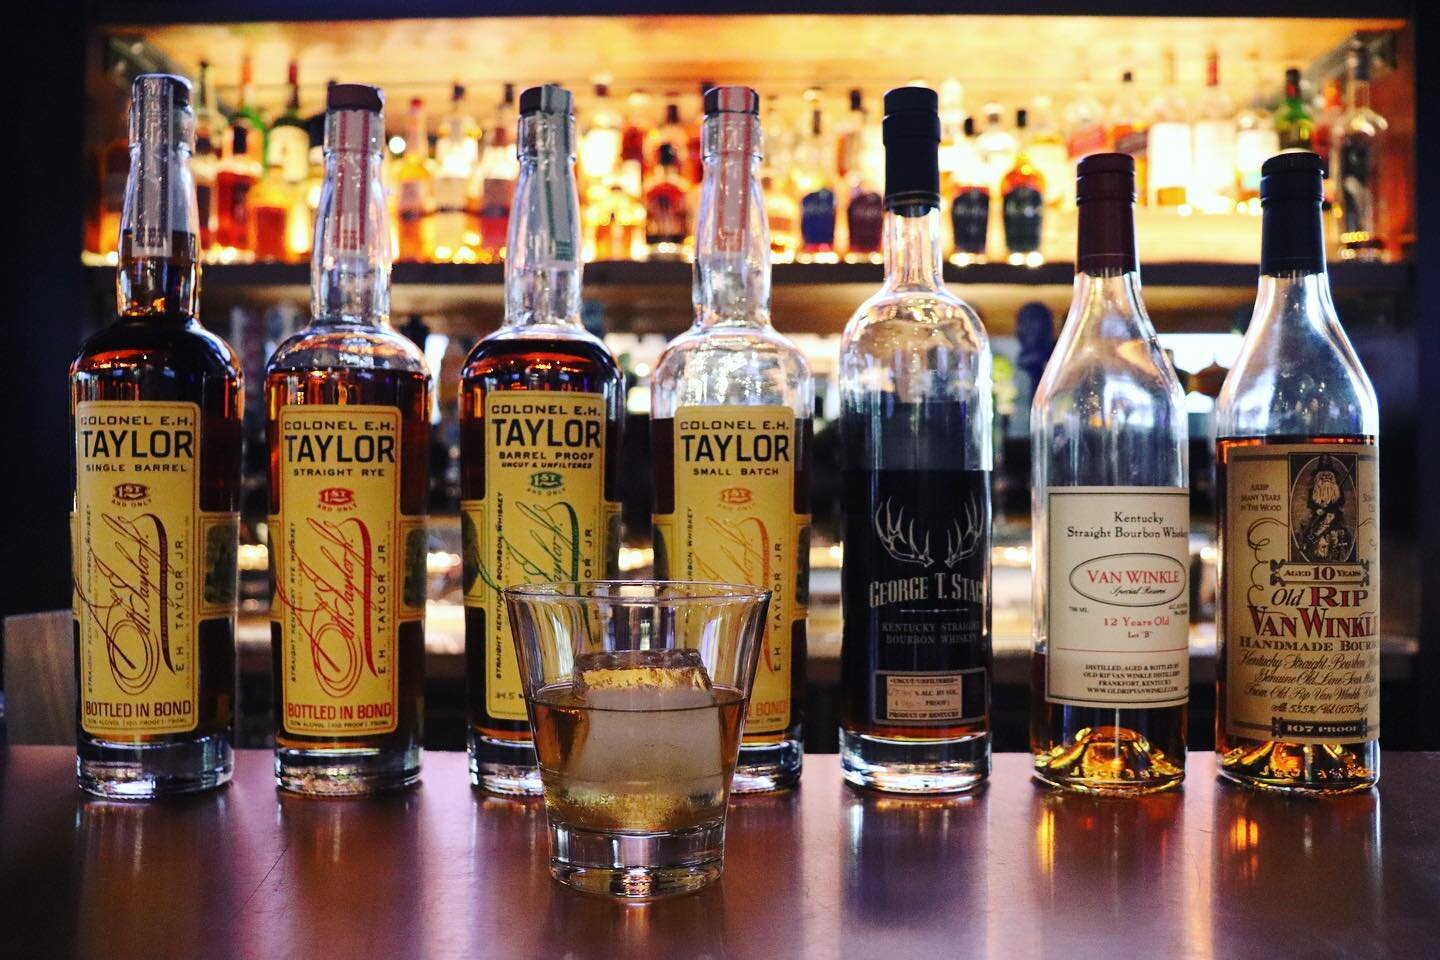 Indulge in our exclusive whiskey collection featuring some of the best bottles around. Enjoy a glass of Van Winkle, George T Stagg from the Buffalo Trace Antique Collection, or try a Taylor whiskey tasting to explore and savor the unique flavors of e